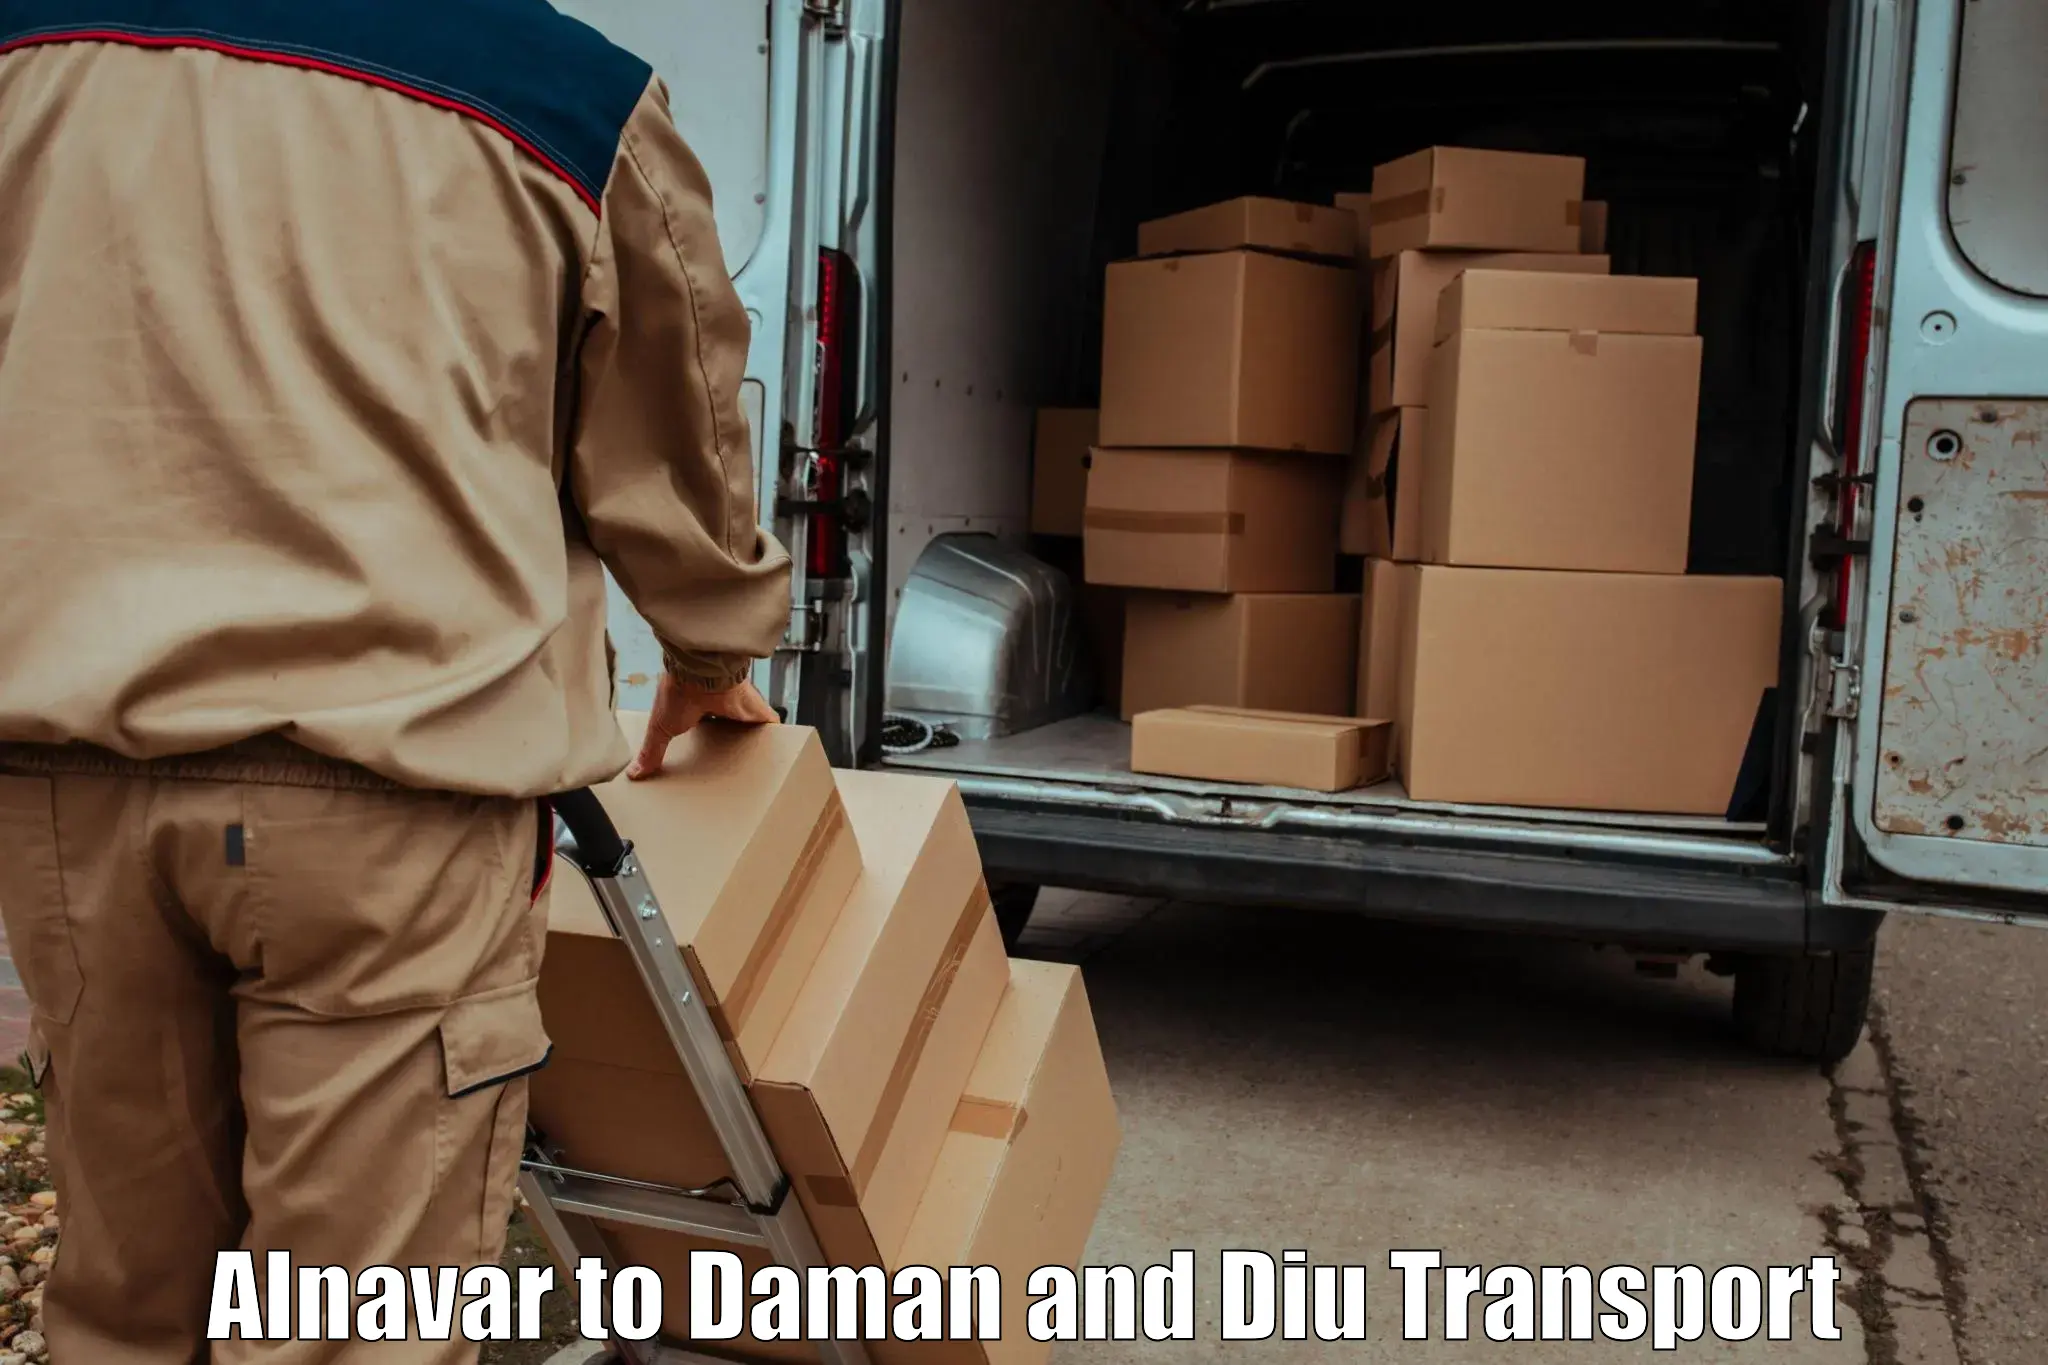 Daily parcel service transport in Alnavar to Daman and Diu